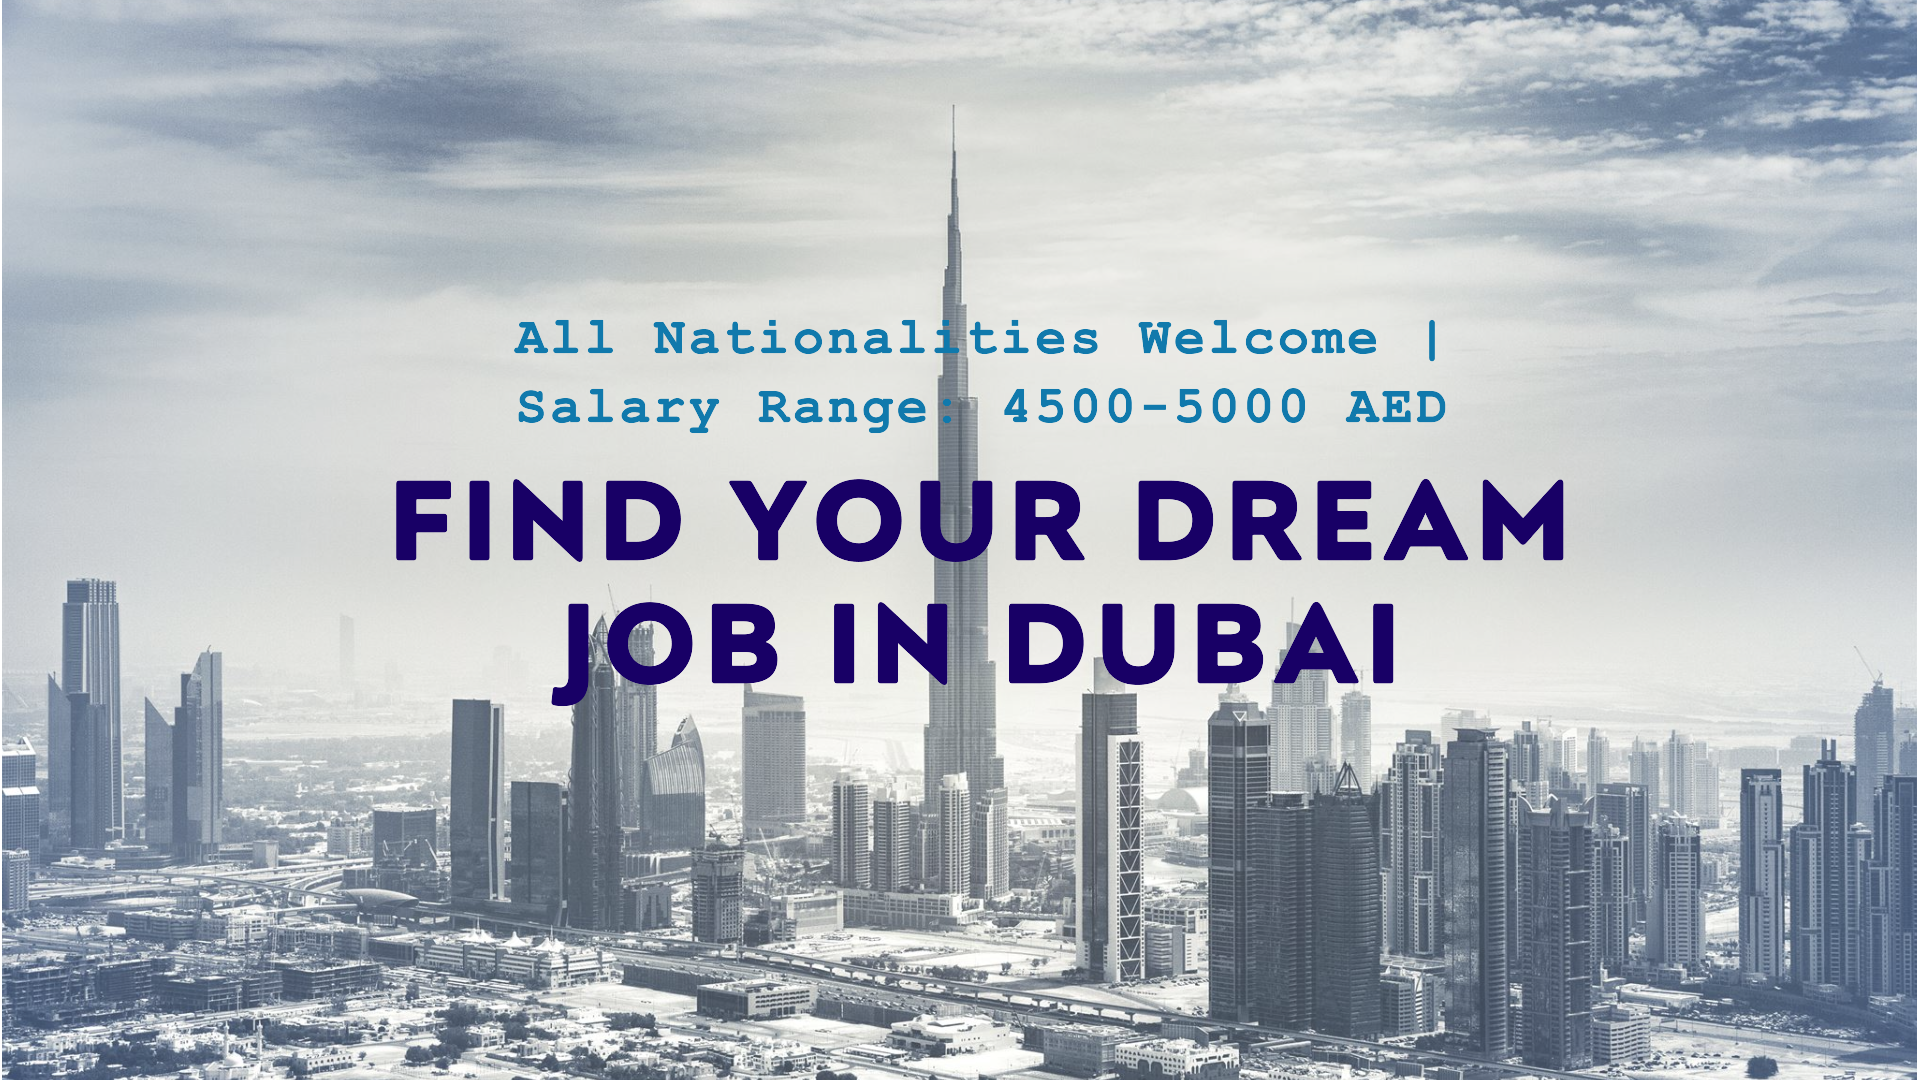 hr jobs in dubai for all nationalities with salary 4500 to 5000 AED